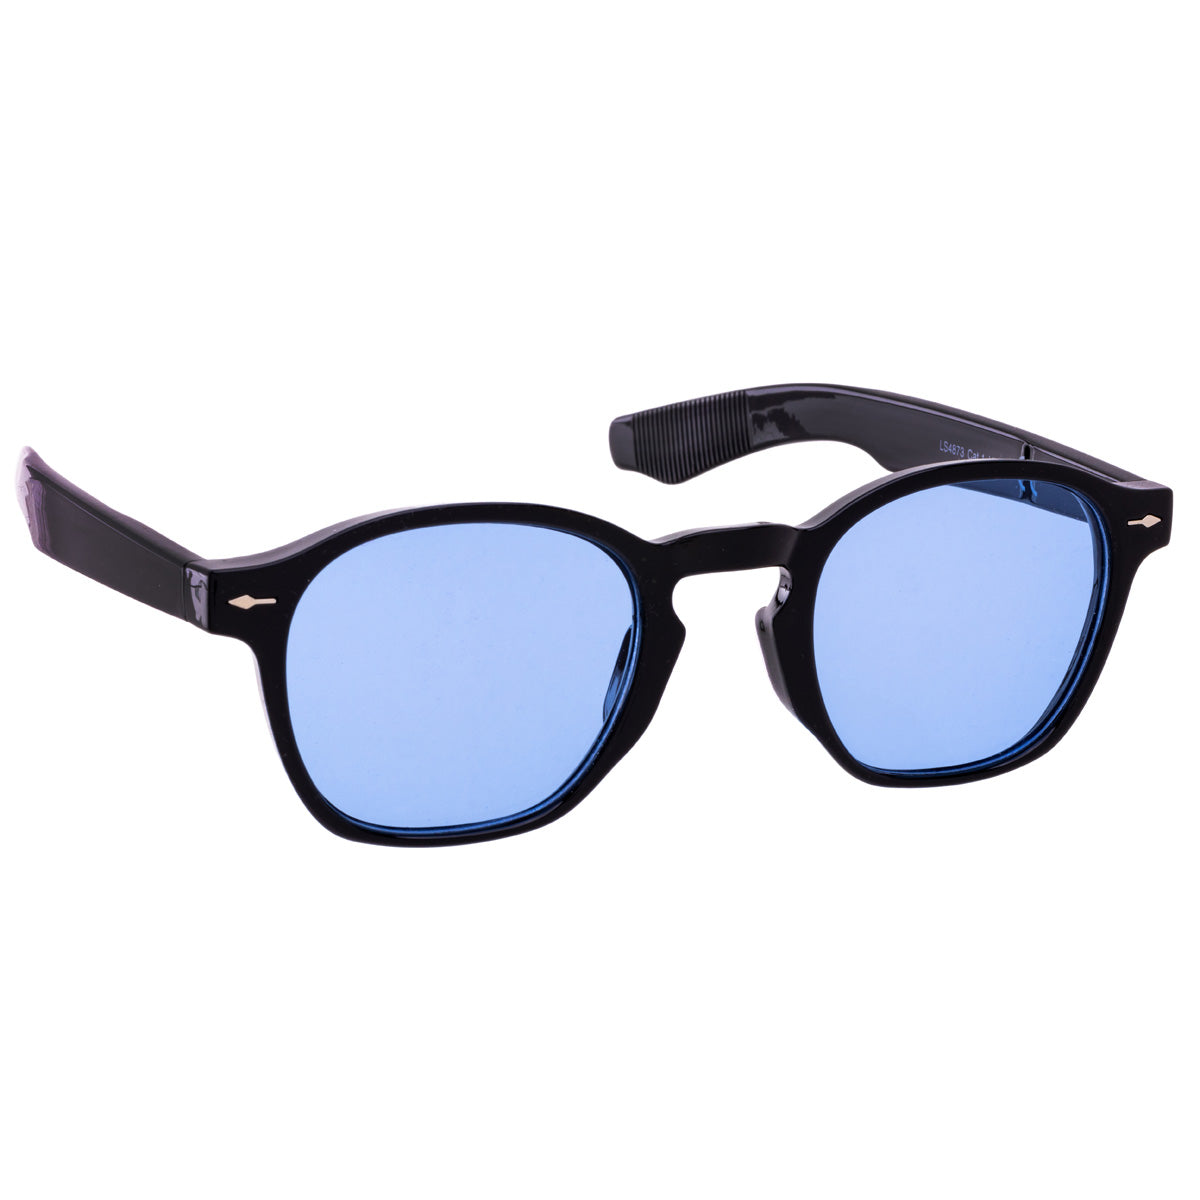 Round sunglasses with plastic frames